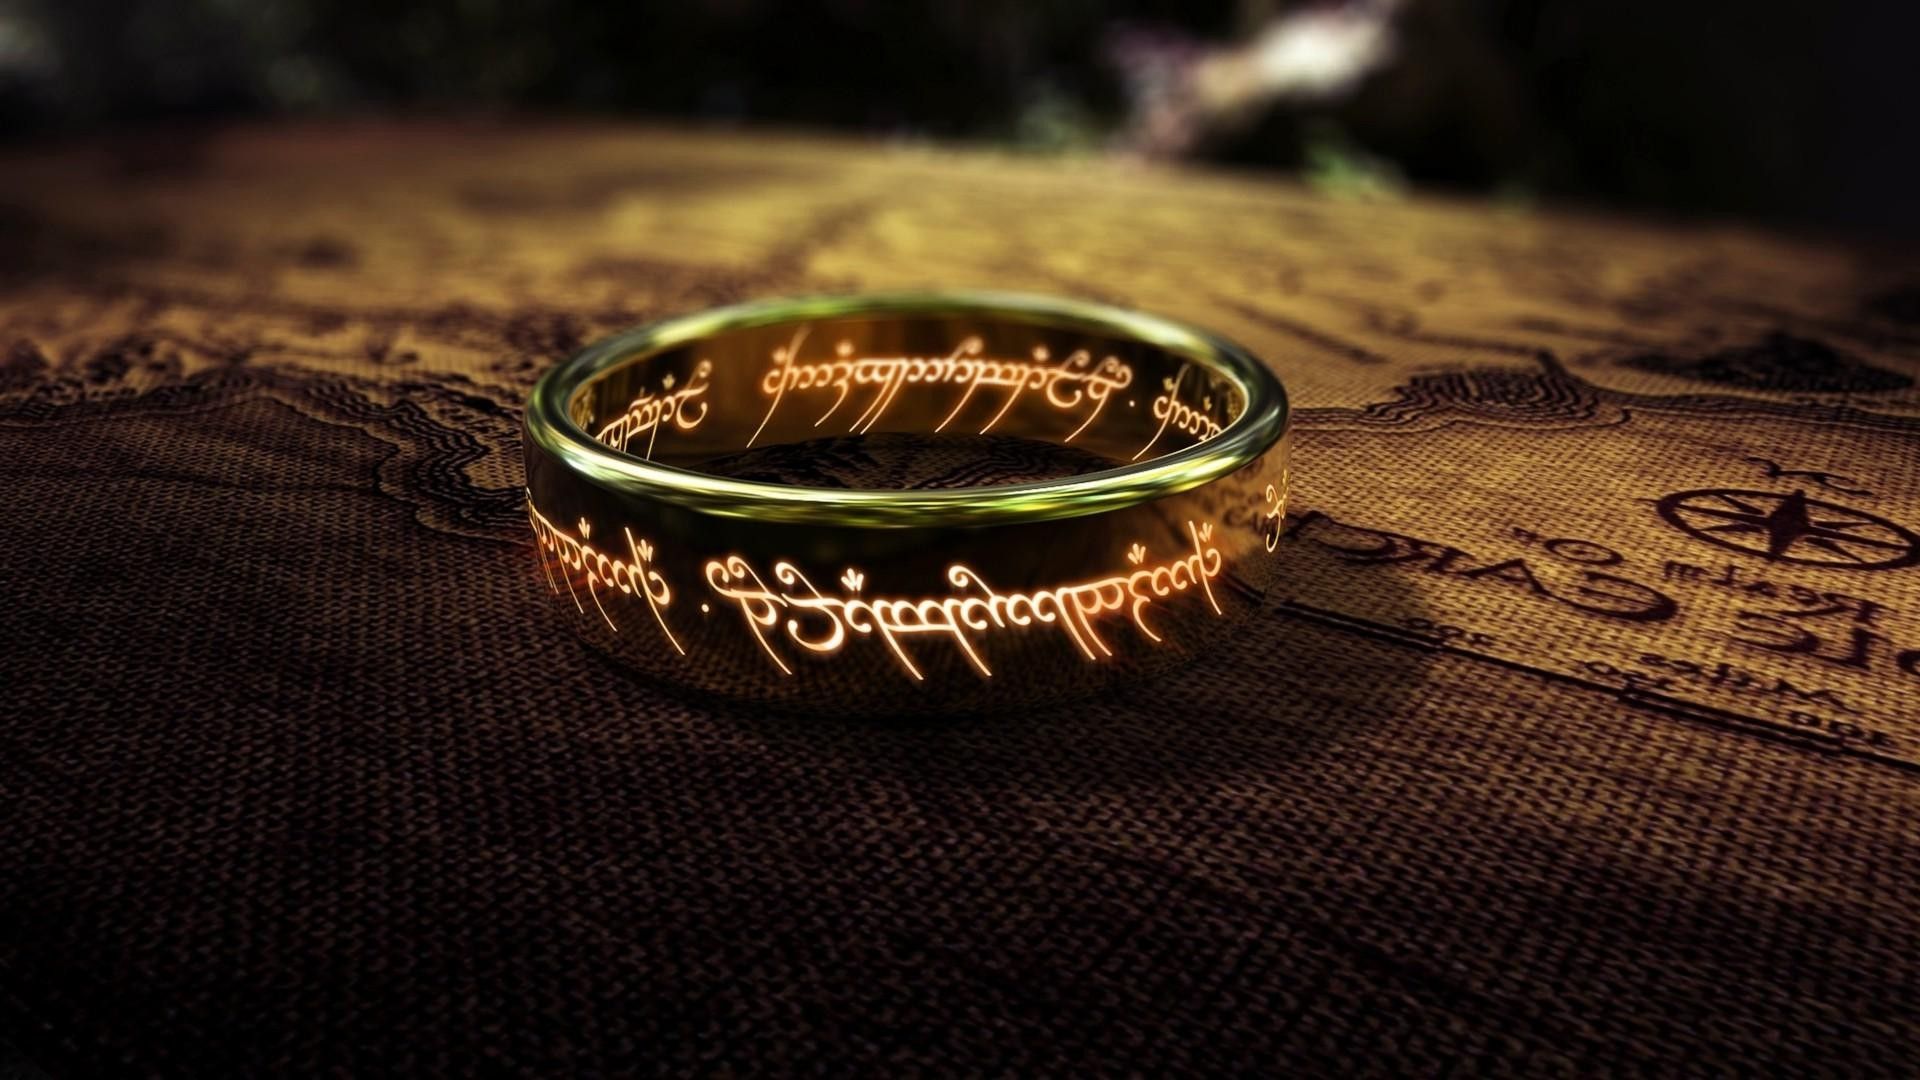 The lord of rings gold ring HD wallpaperfreshwidewallpaper.com